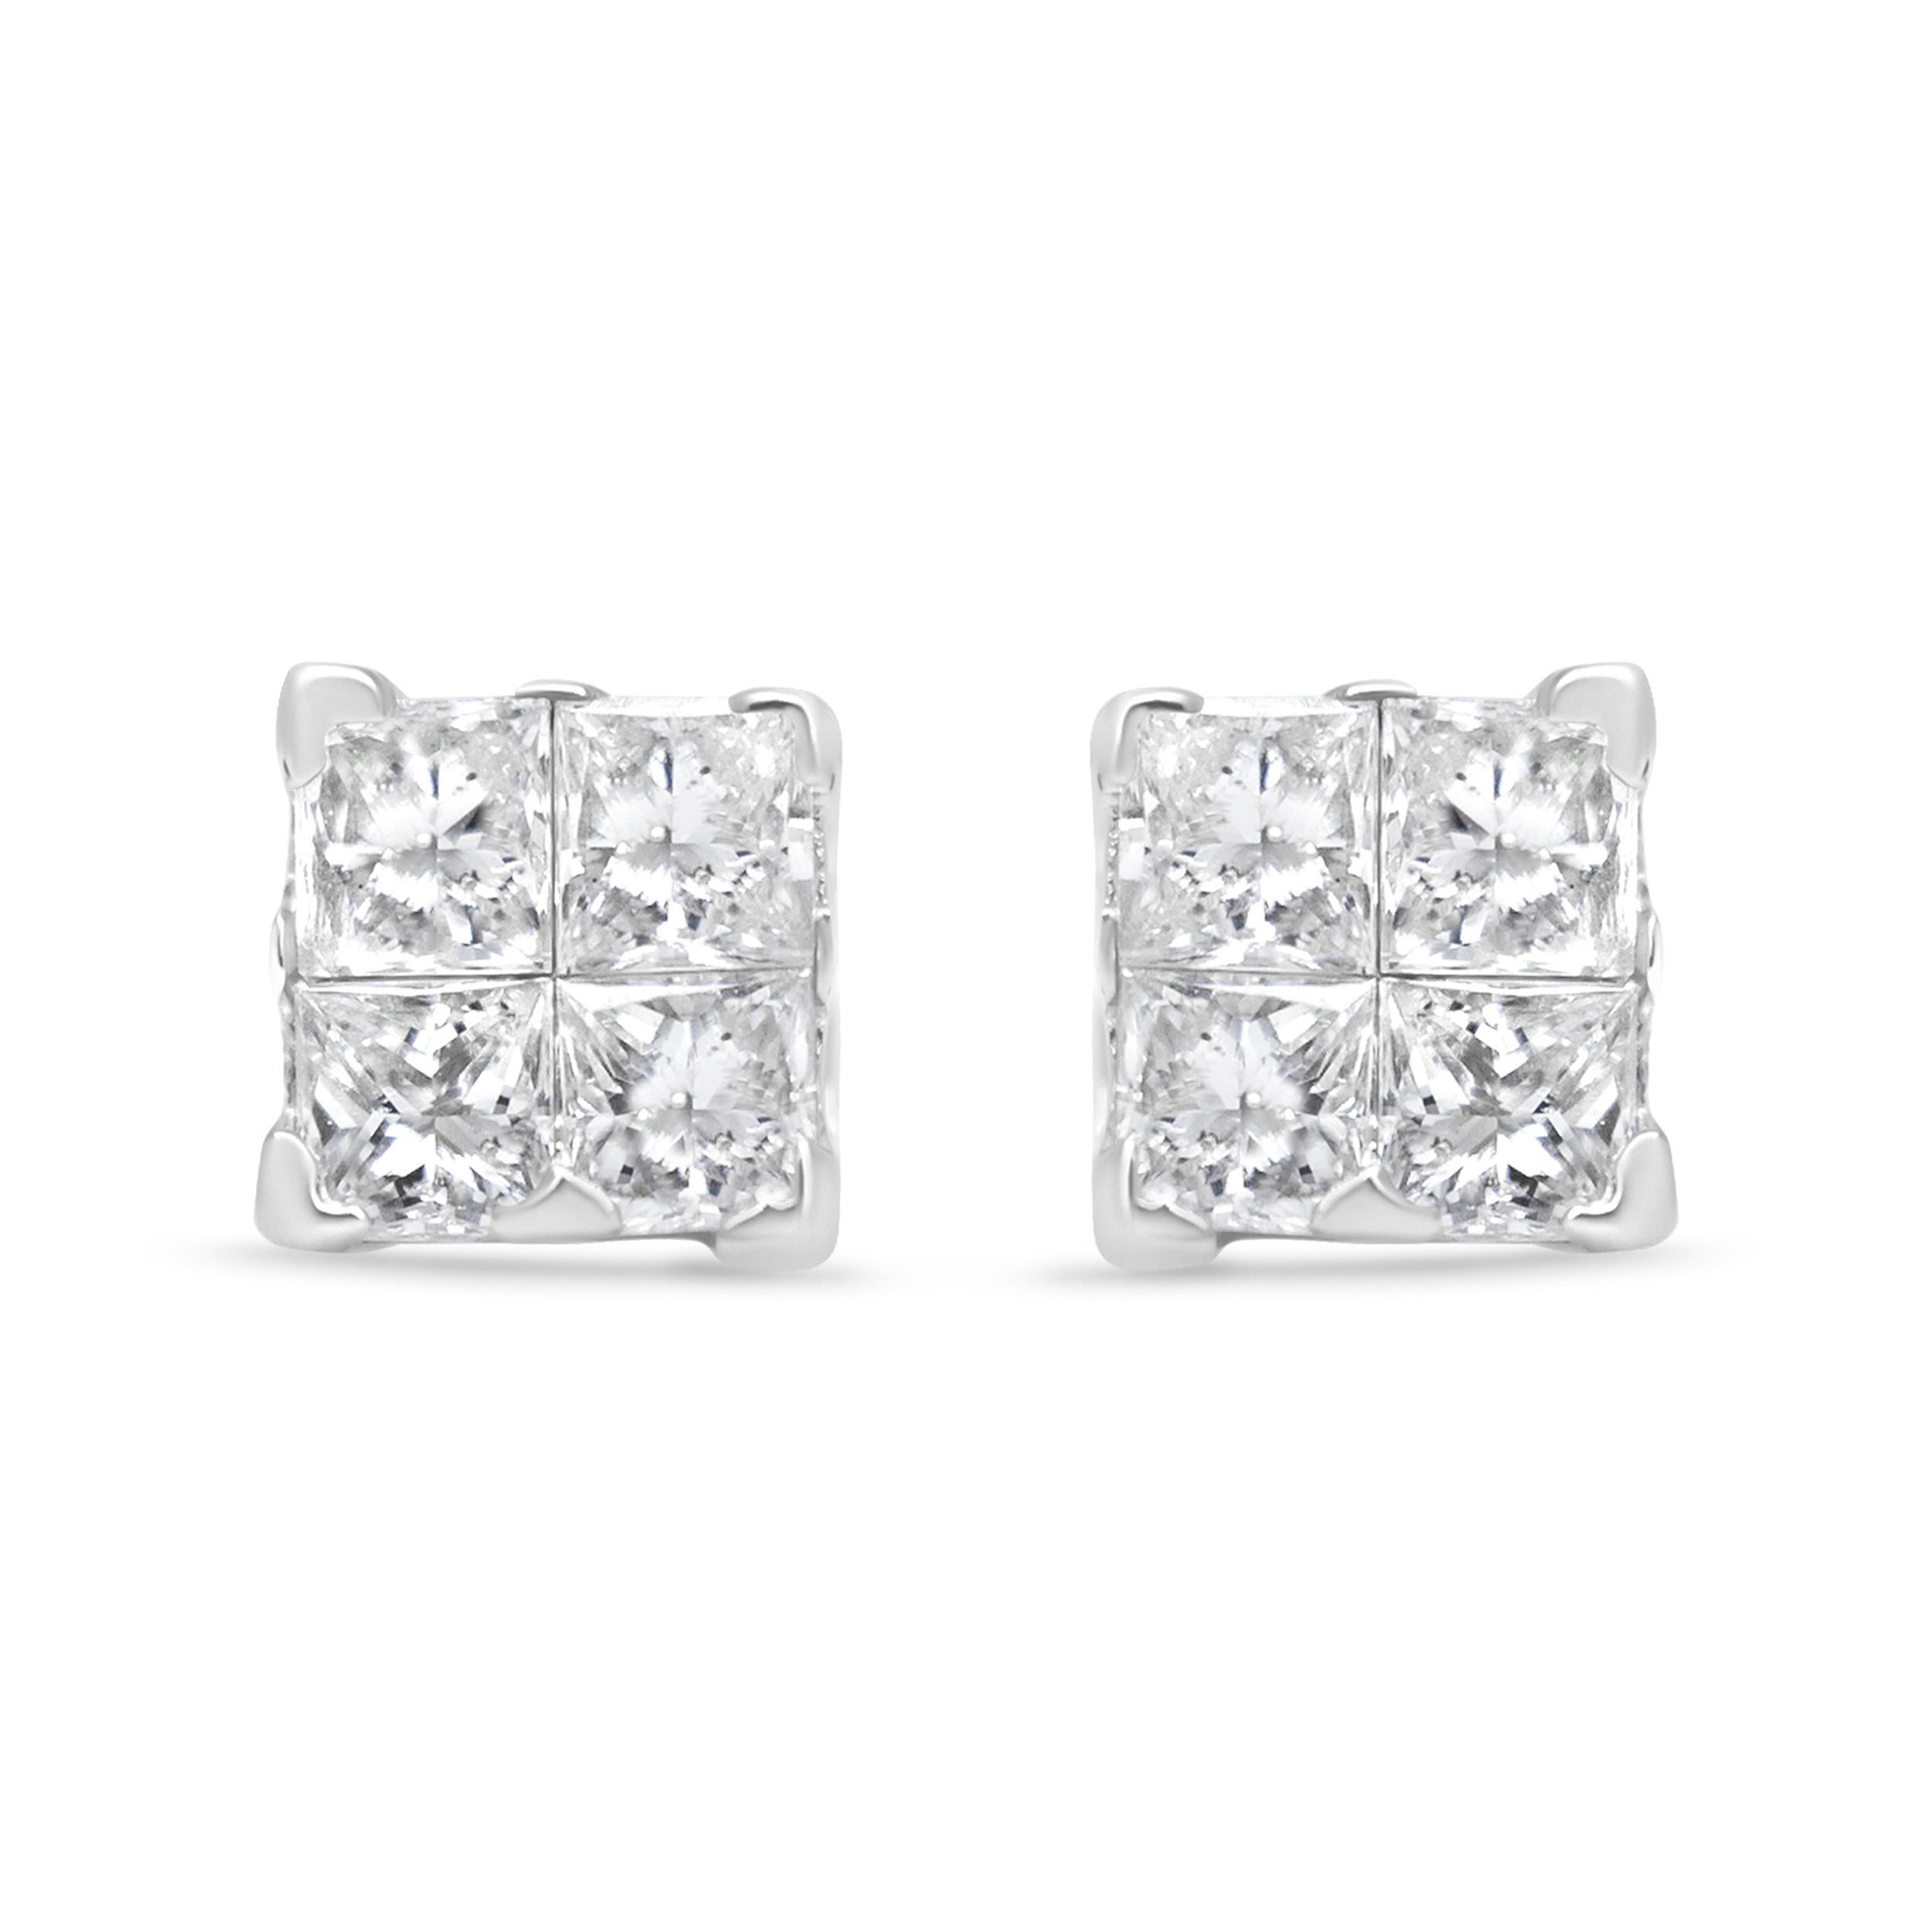 Tap into your royal nature with these contemporary geometric diamond studs. This regal pair is crafted of polished 14k white gold and each square stud features a cluster of four princess-cut white diamonds in an invisible setting that perfectly